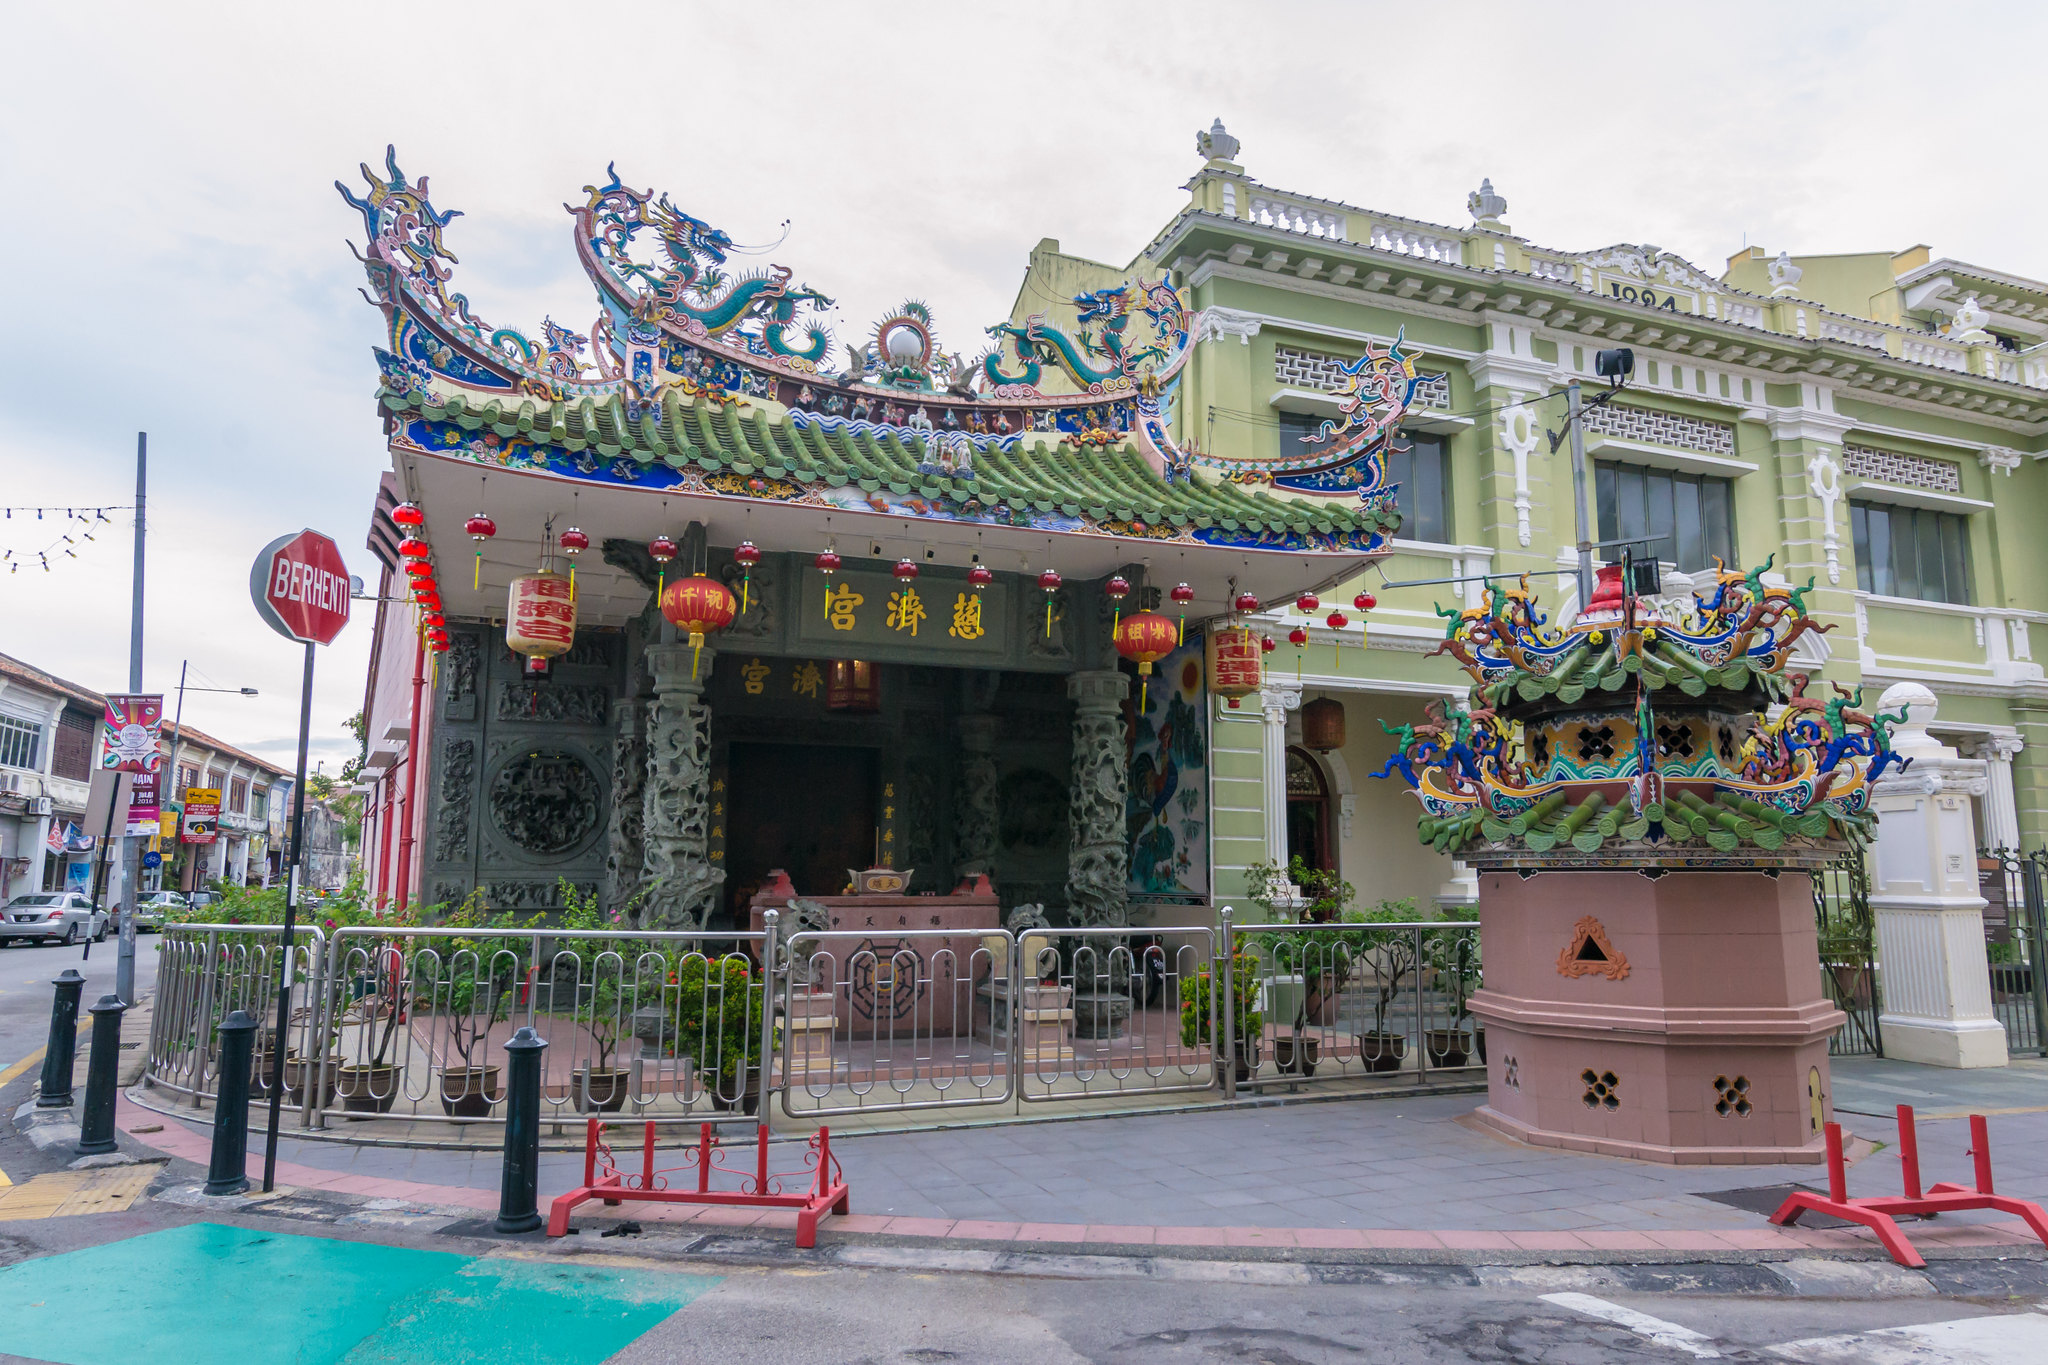 One of the many beautiful temples in George Town, Penang